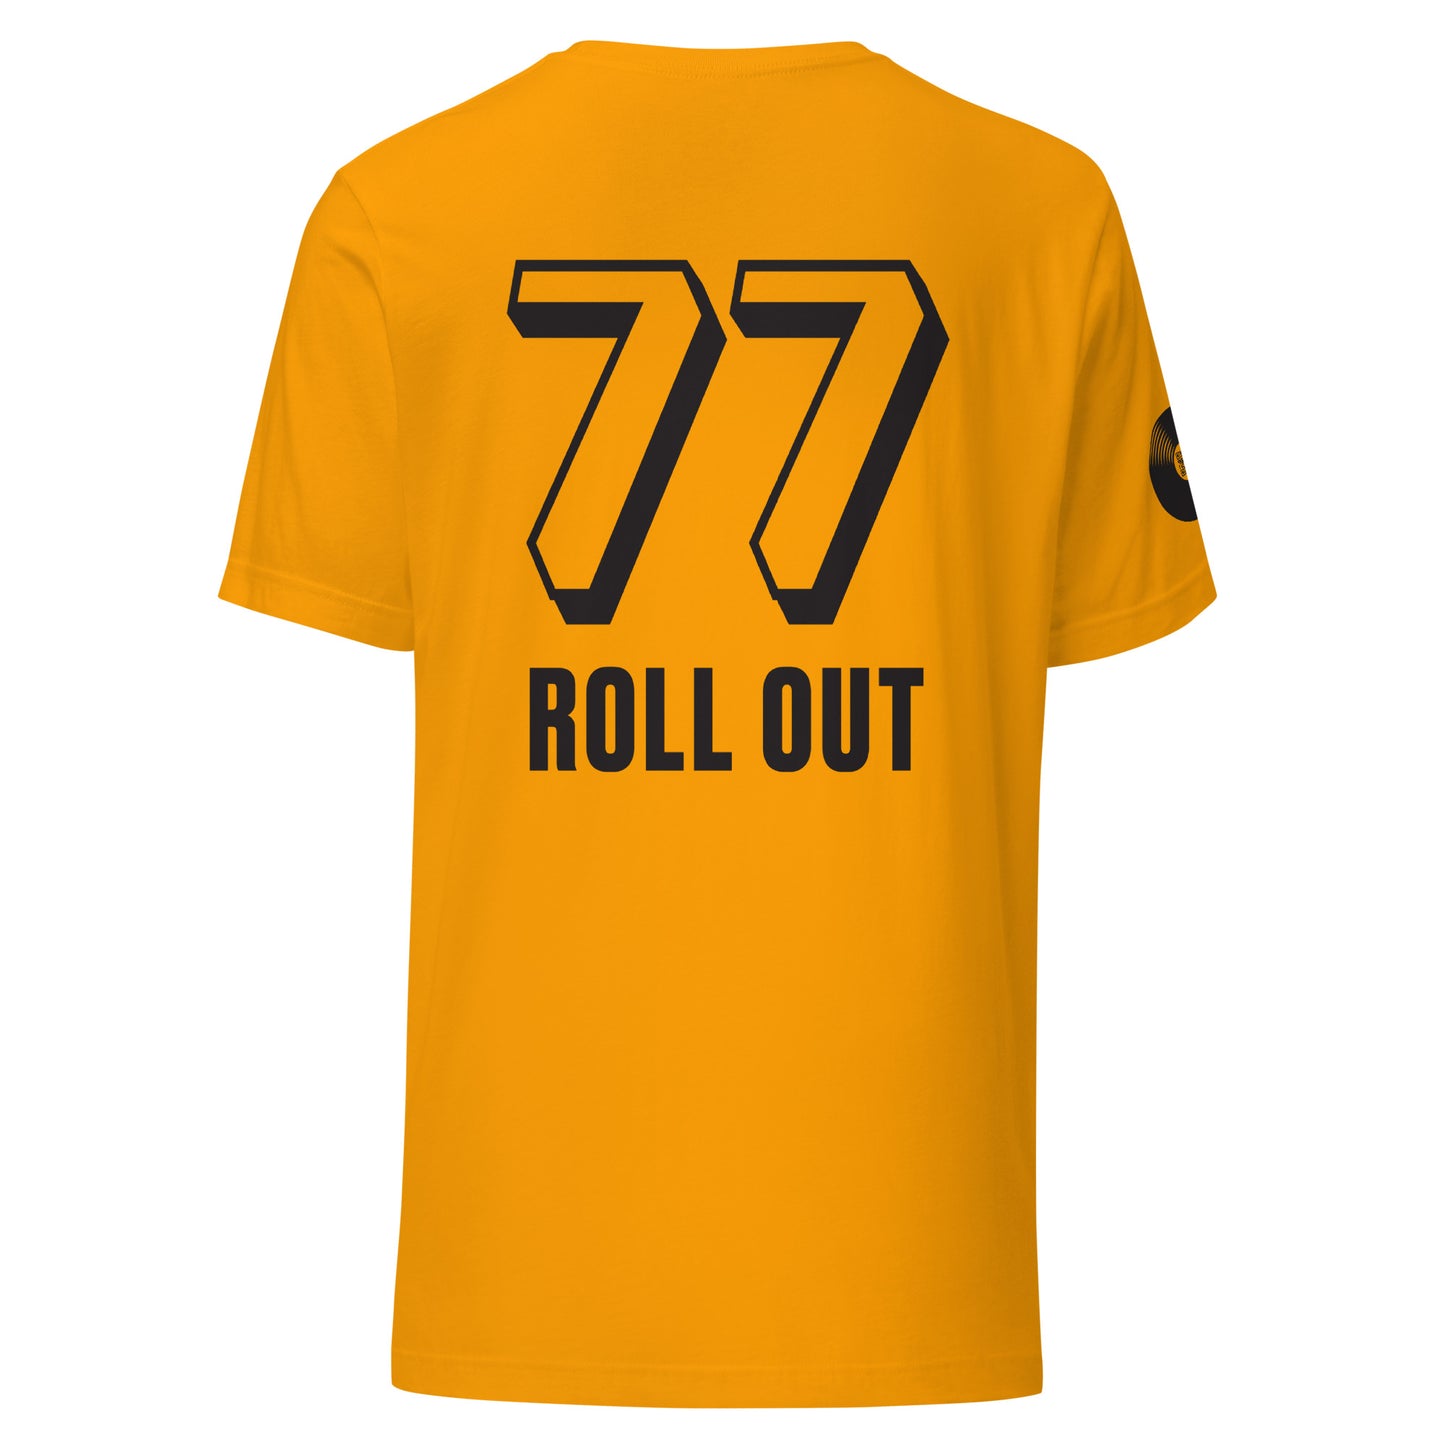 Roll Out 77 Tee - Gold / Black